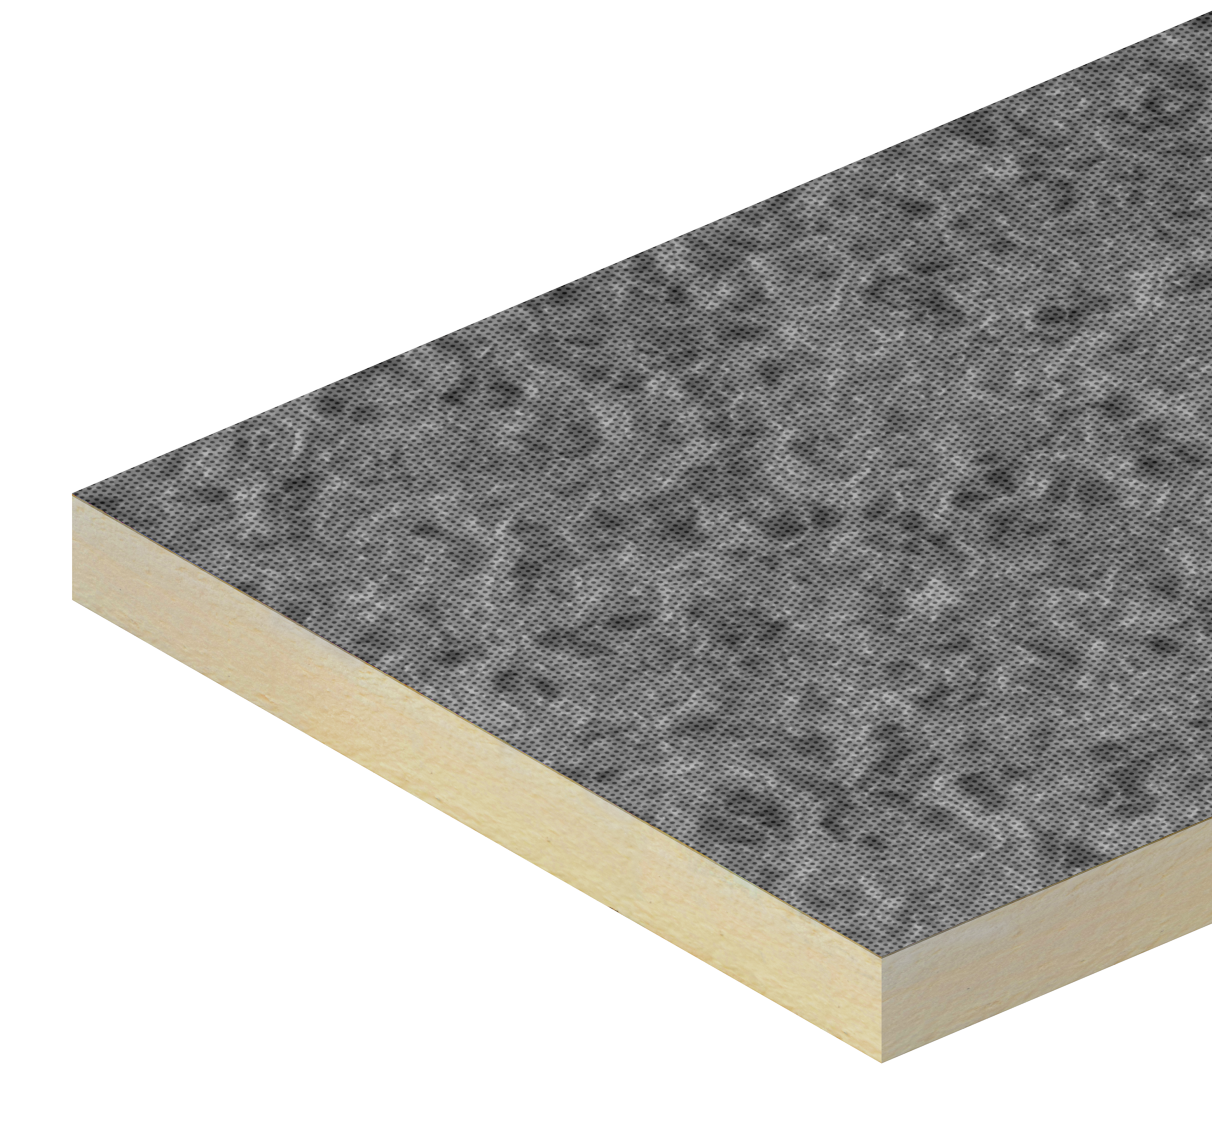 EcoTherm Inno-Torch Flat Roof Insulation Board - 1200mm x 600mm x 120mm